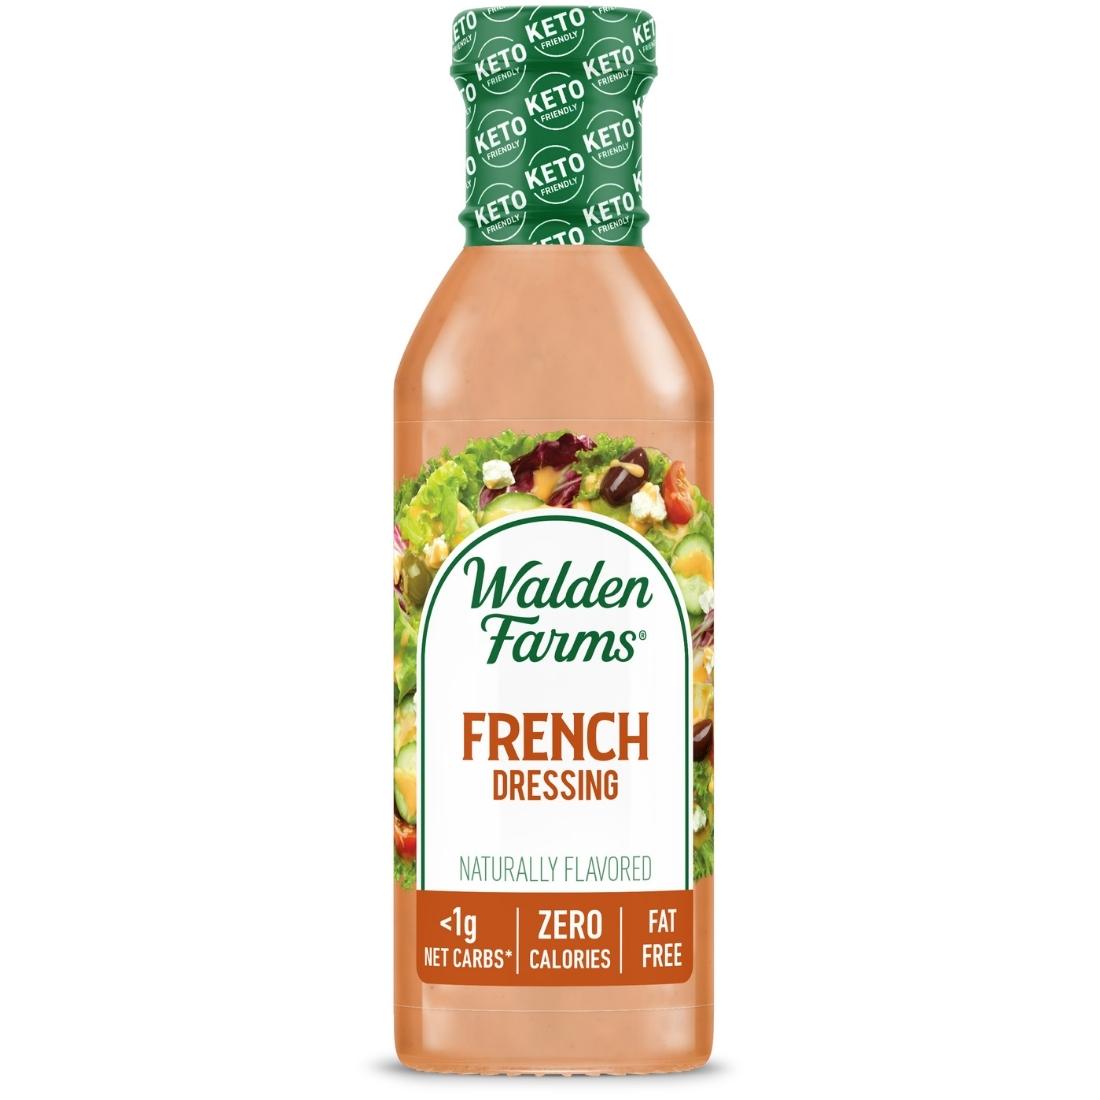 13 Best Low Calorie Sauces & Dressings You Can Find at The Store